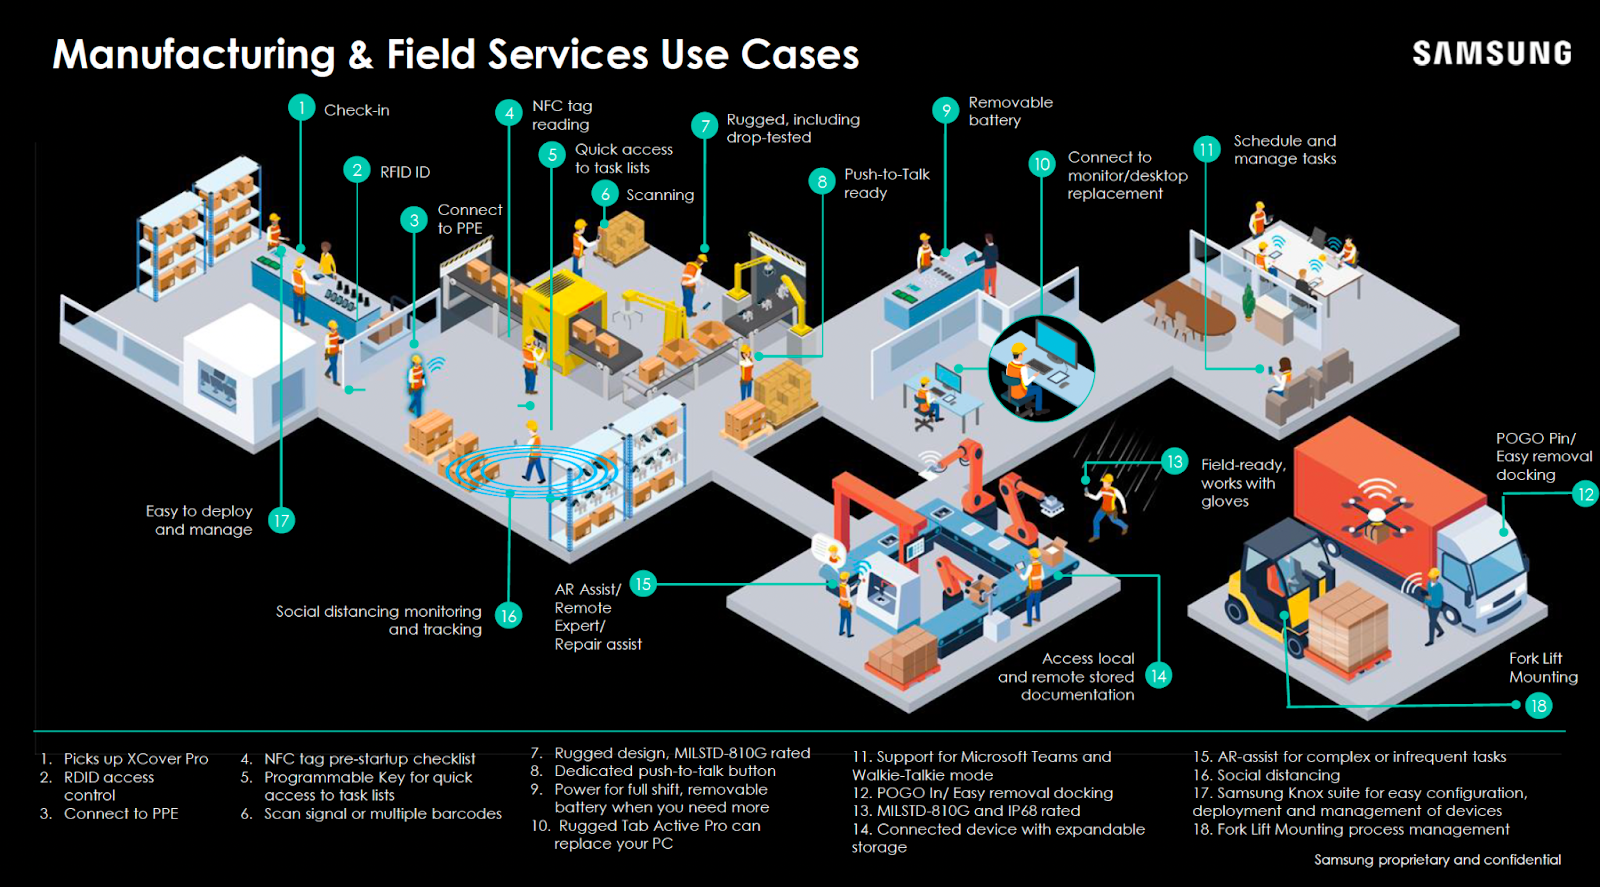 Samsung manufacturing and field services use cases